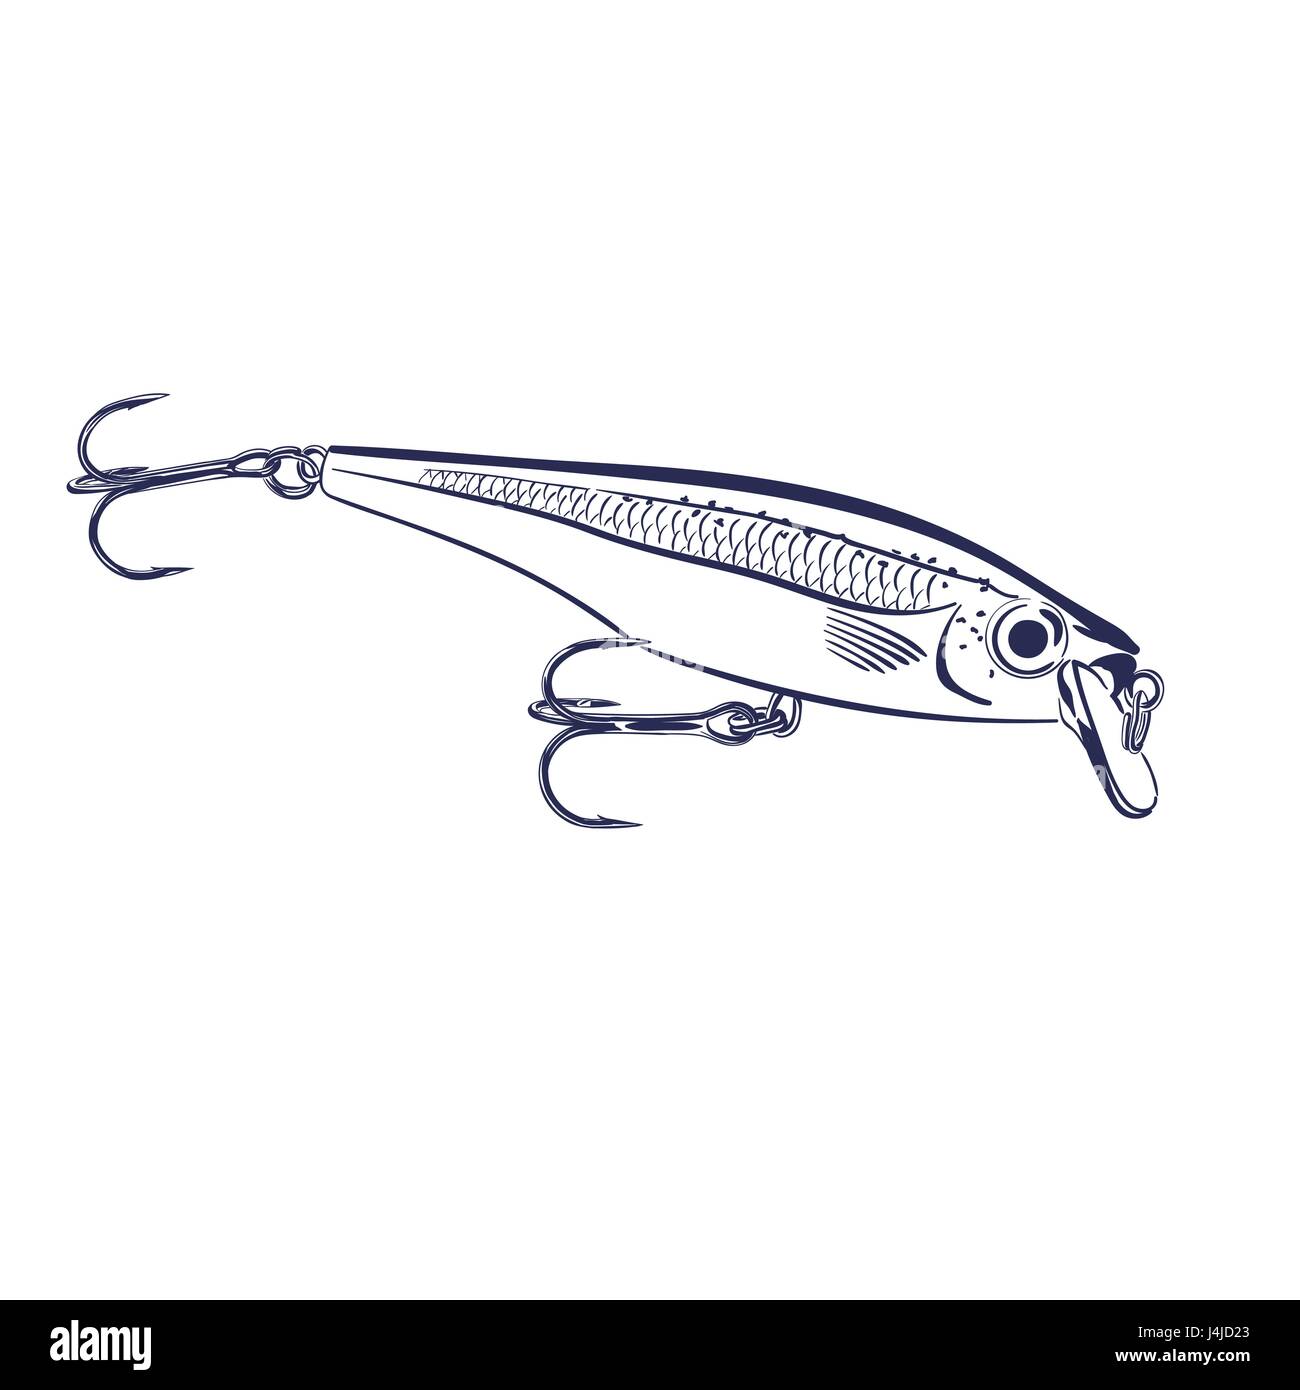 spinning lure wobblers Stock Vector